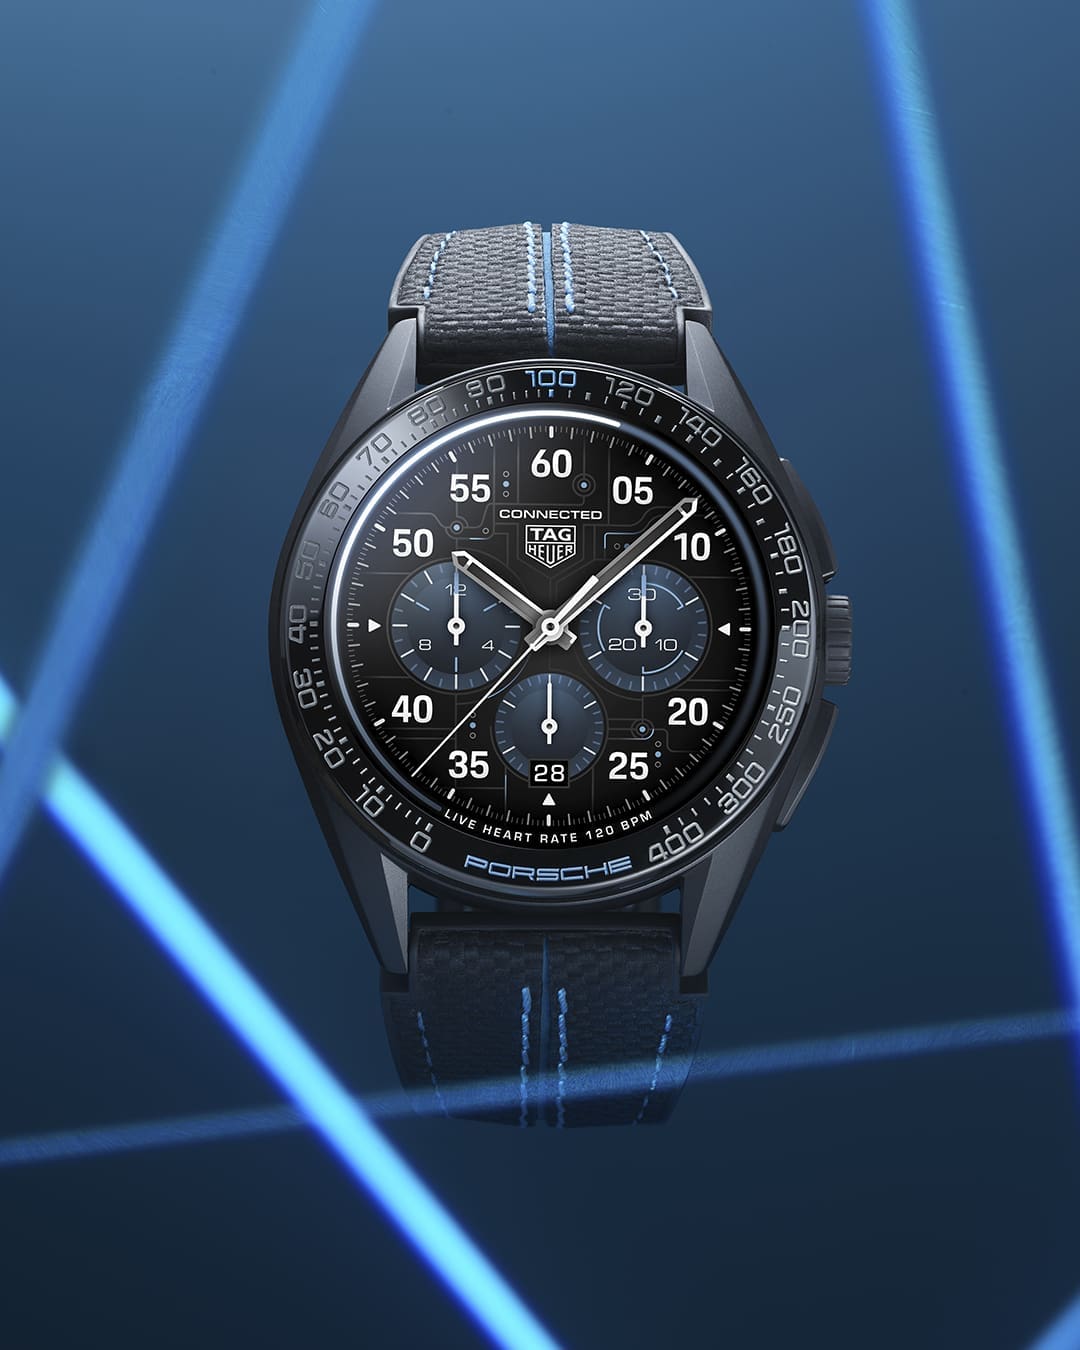 INTRODUCING: The TAG Heuer Connected Porsche Edition can talk to your car (assuming it’s a Porsche)